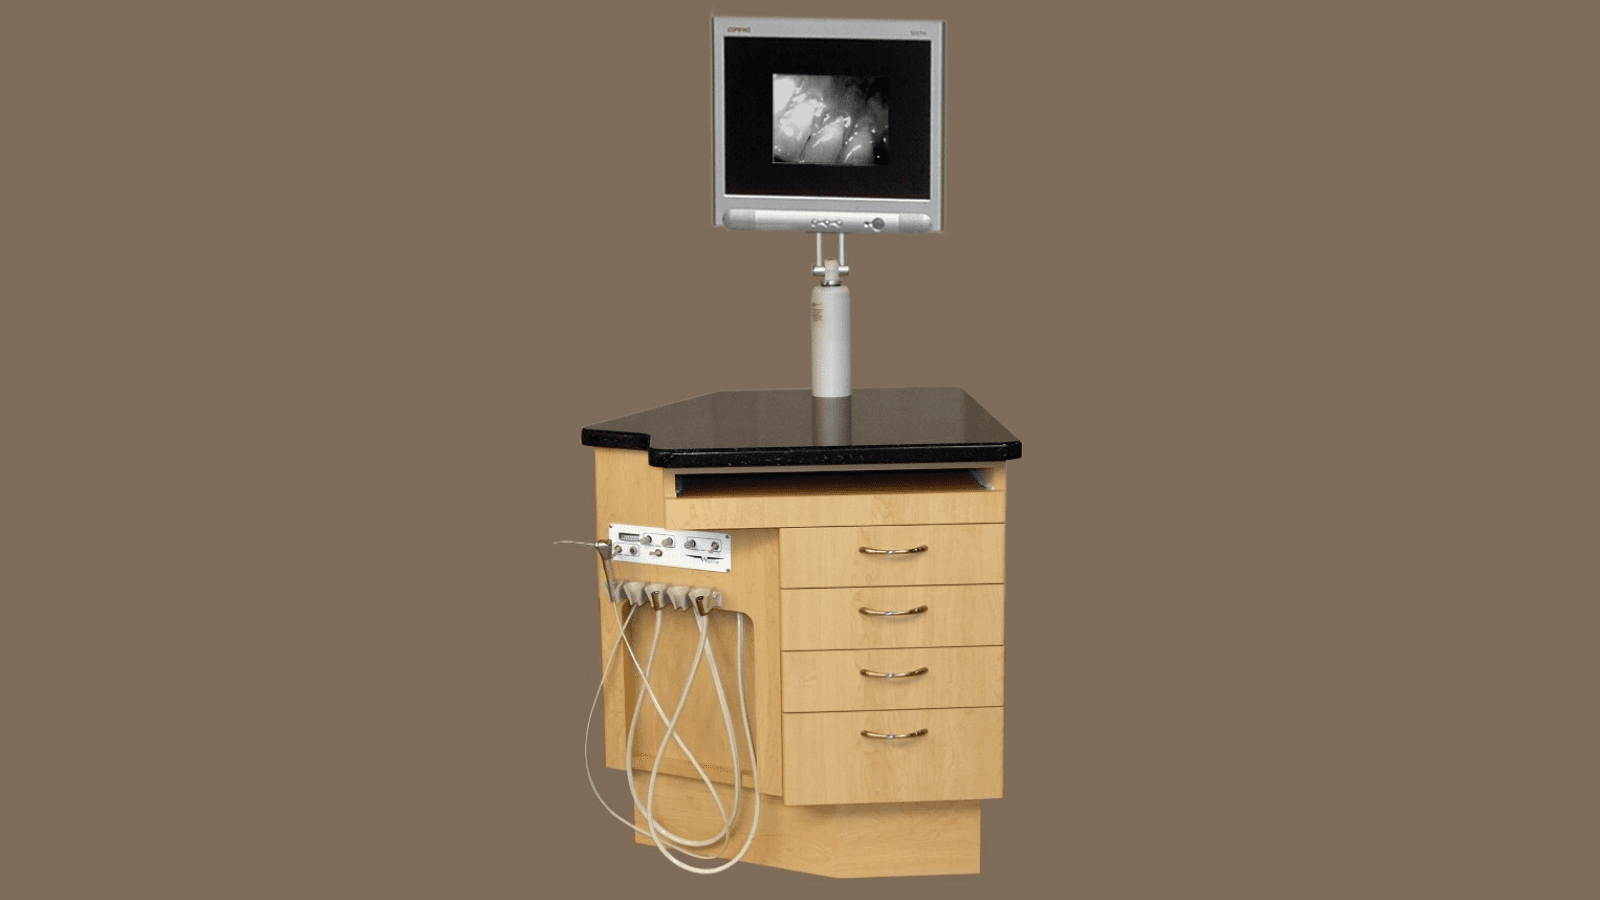 Sp400 orthodontic delivery cart for cpu by westar